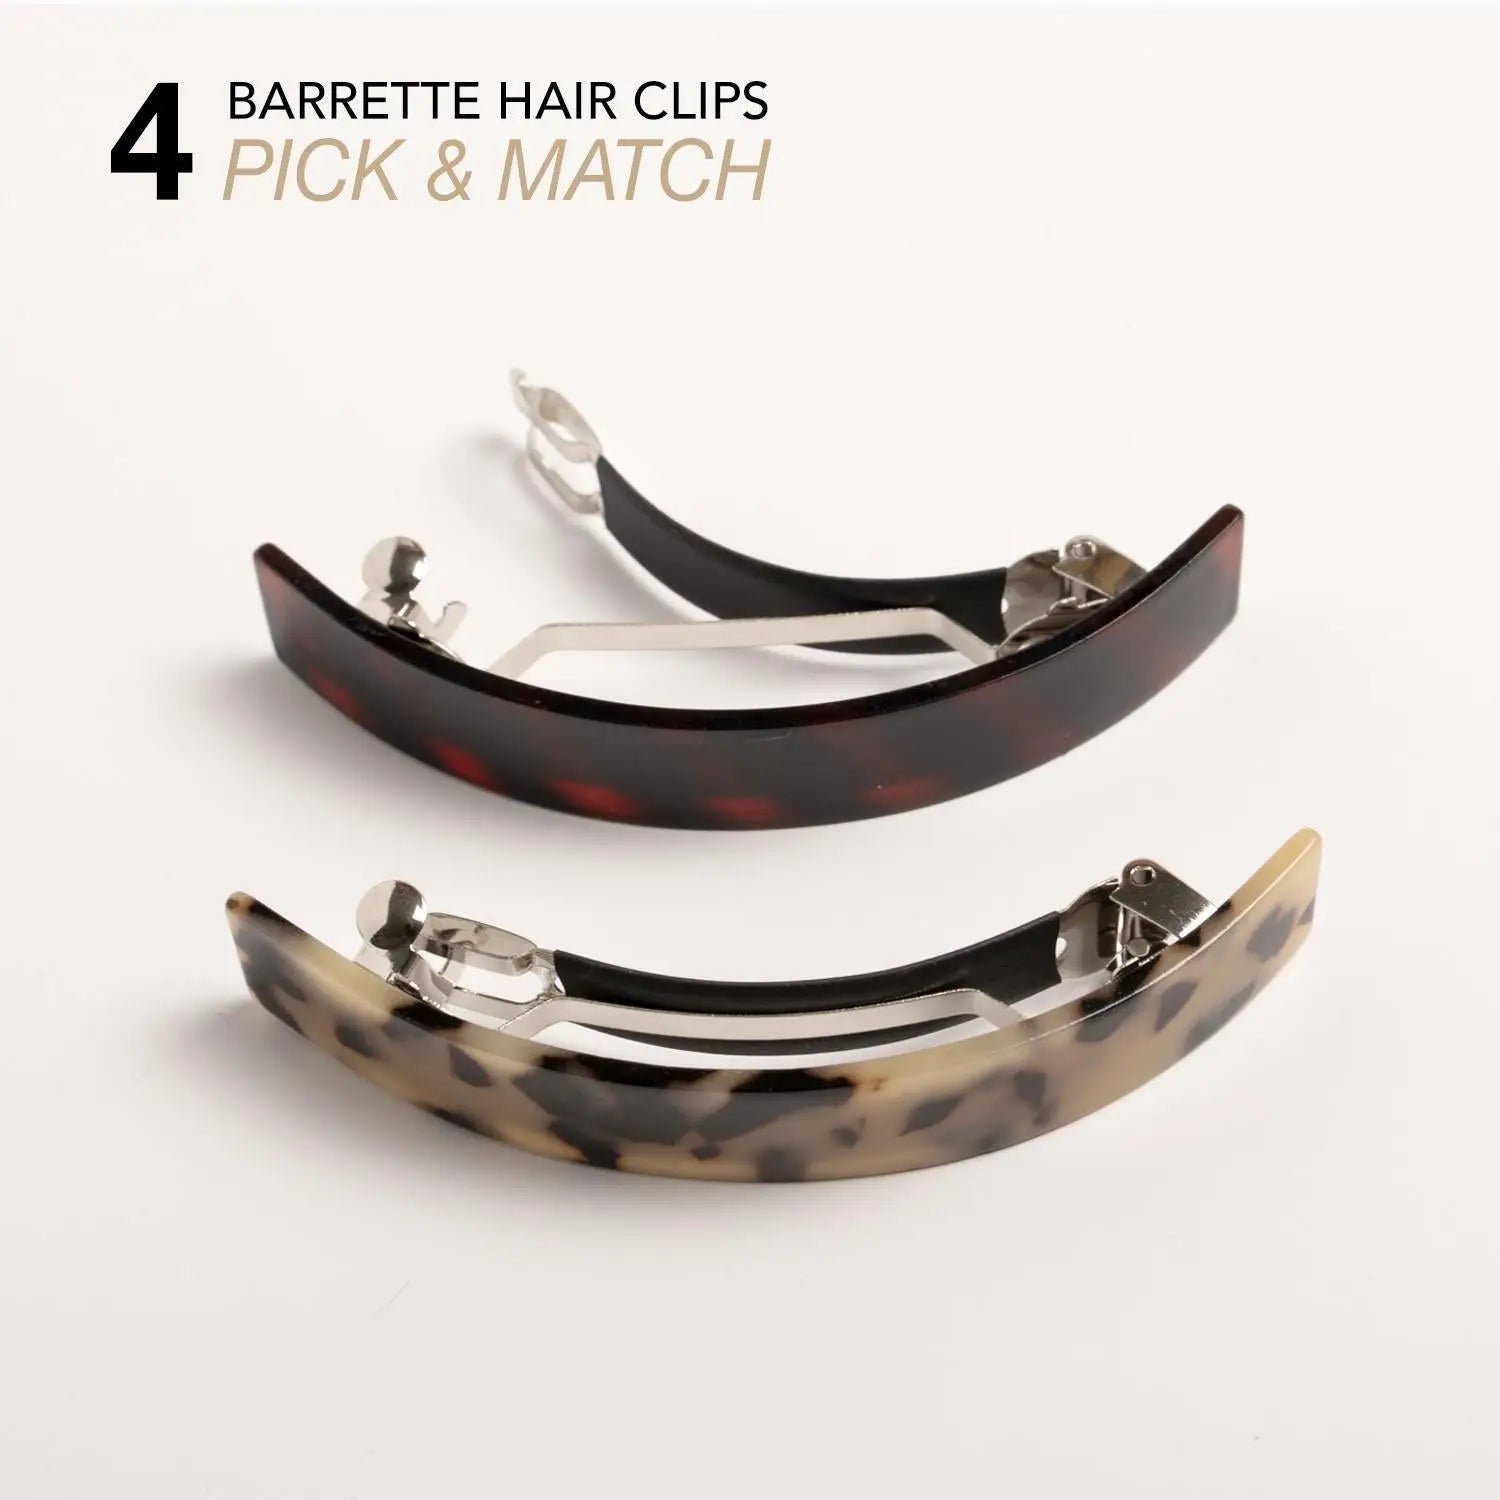 4-Piece Hair Clip Set - French Barrettes on White Surface